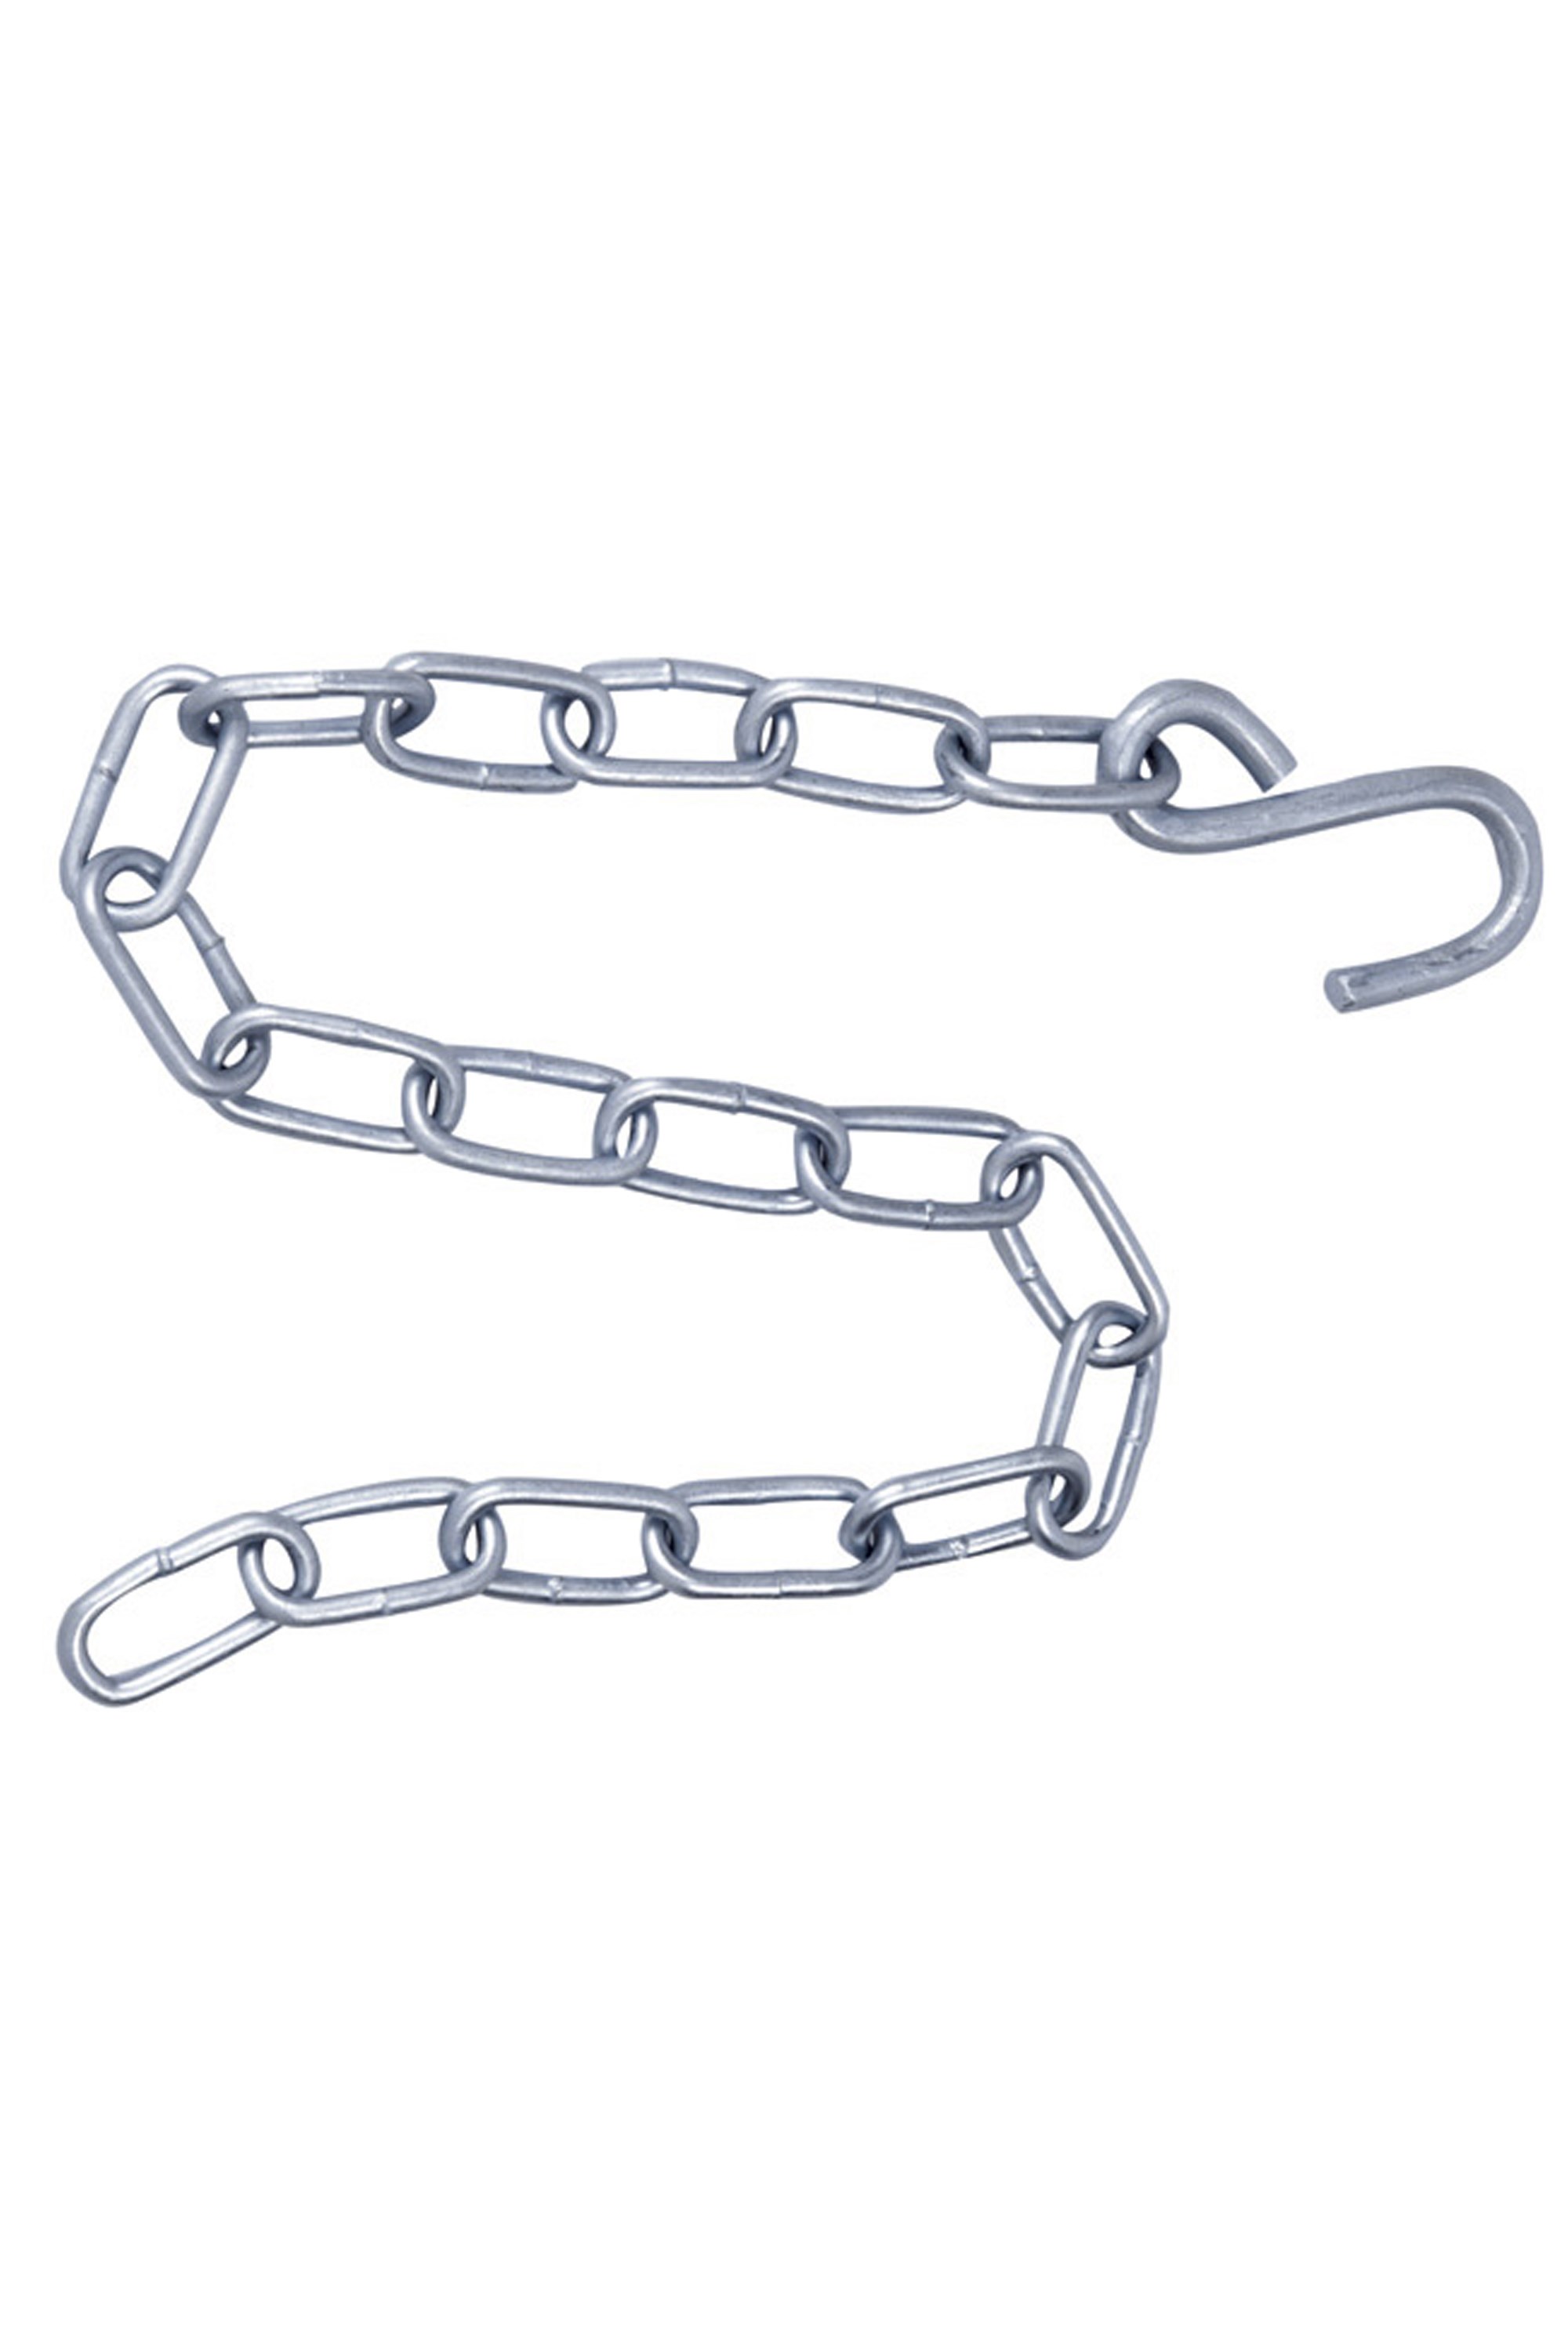 Liana Extension Chain For Hammocks And Chairs -